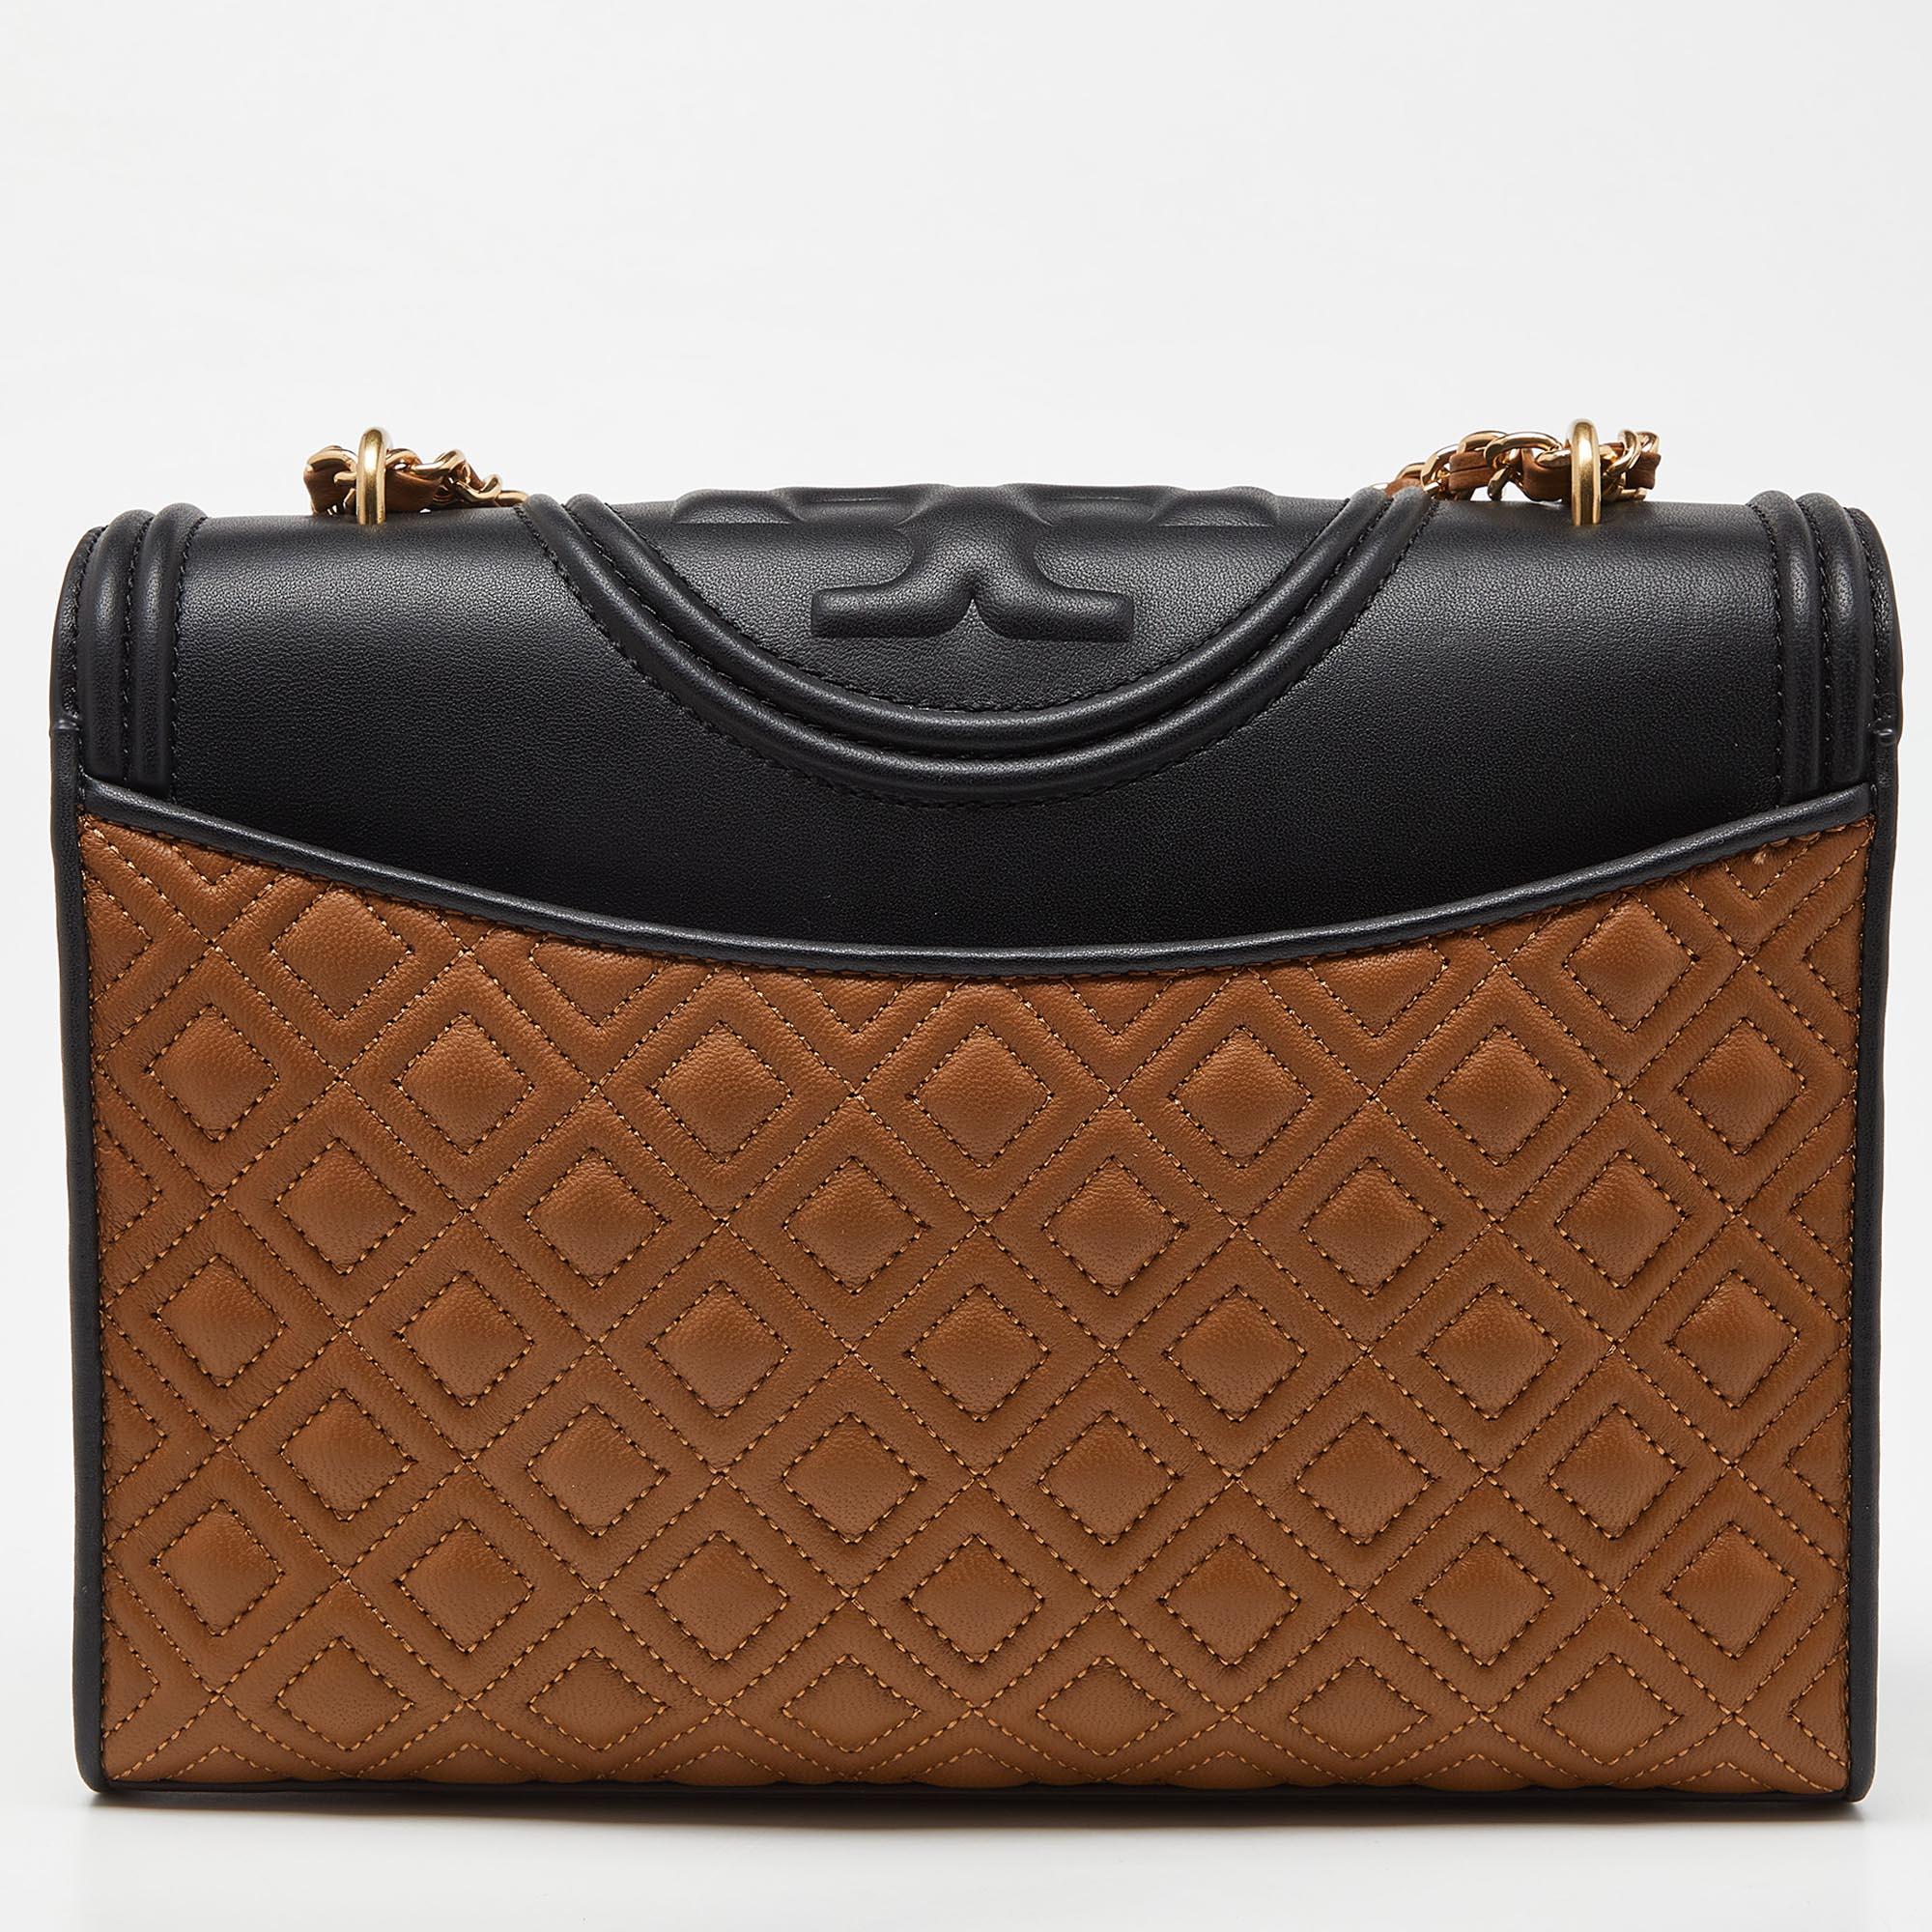 This Fleming shoulder bag from Tory Burch has been meticulously crafted from leather and designed with quilts in diamond patterns and the logo on the top. The flap opens to a fabric-lined interior, and the bag is held by an interwoven chain